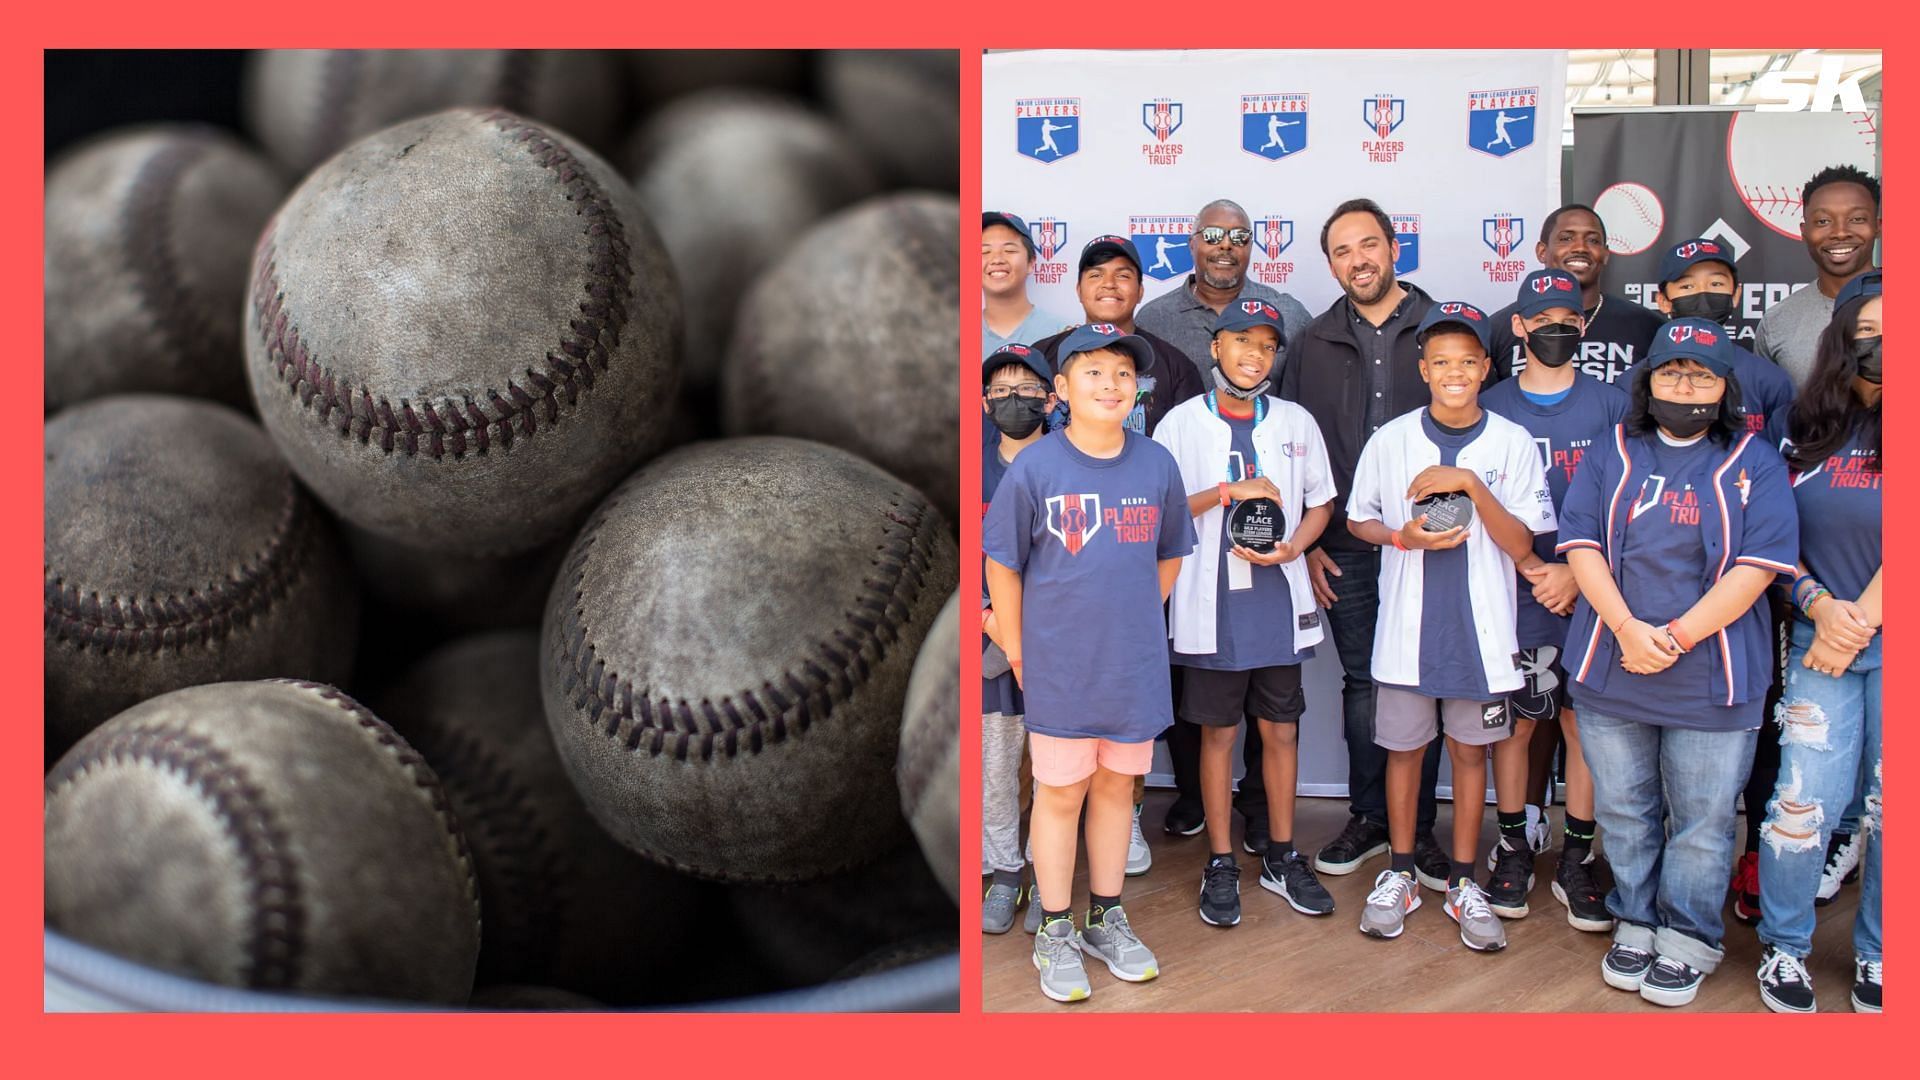 What is the MLB players STEM League?